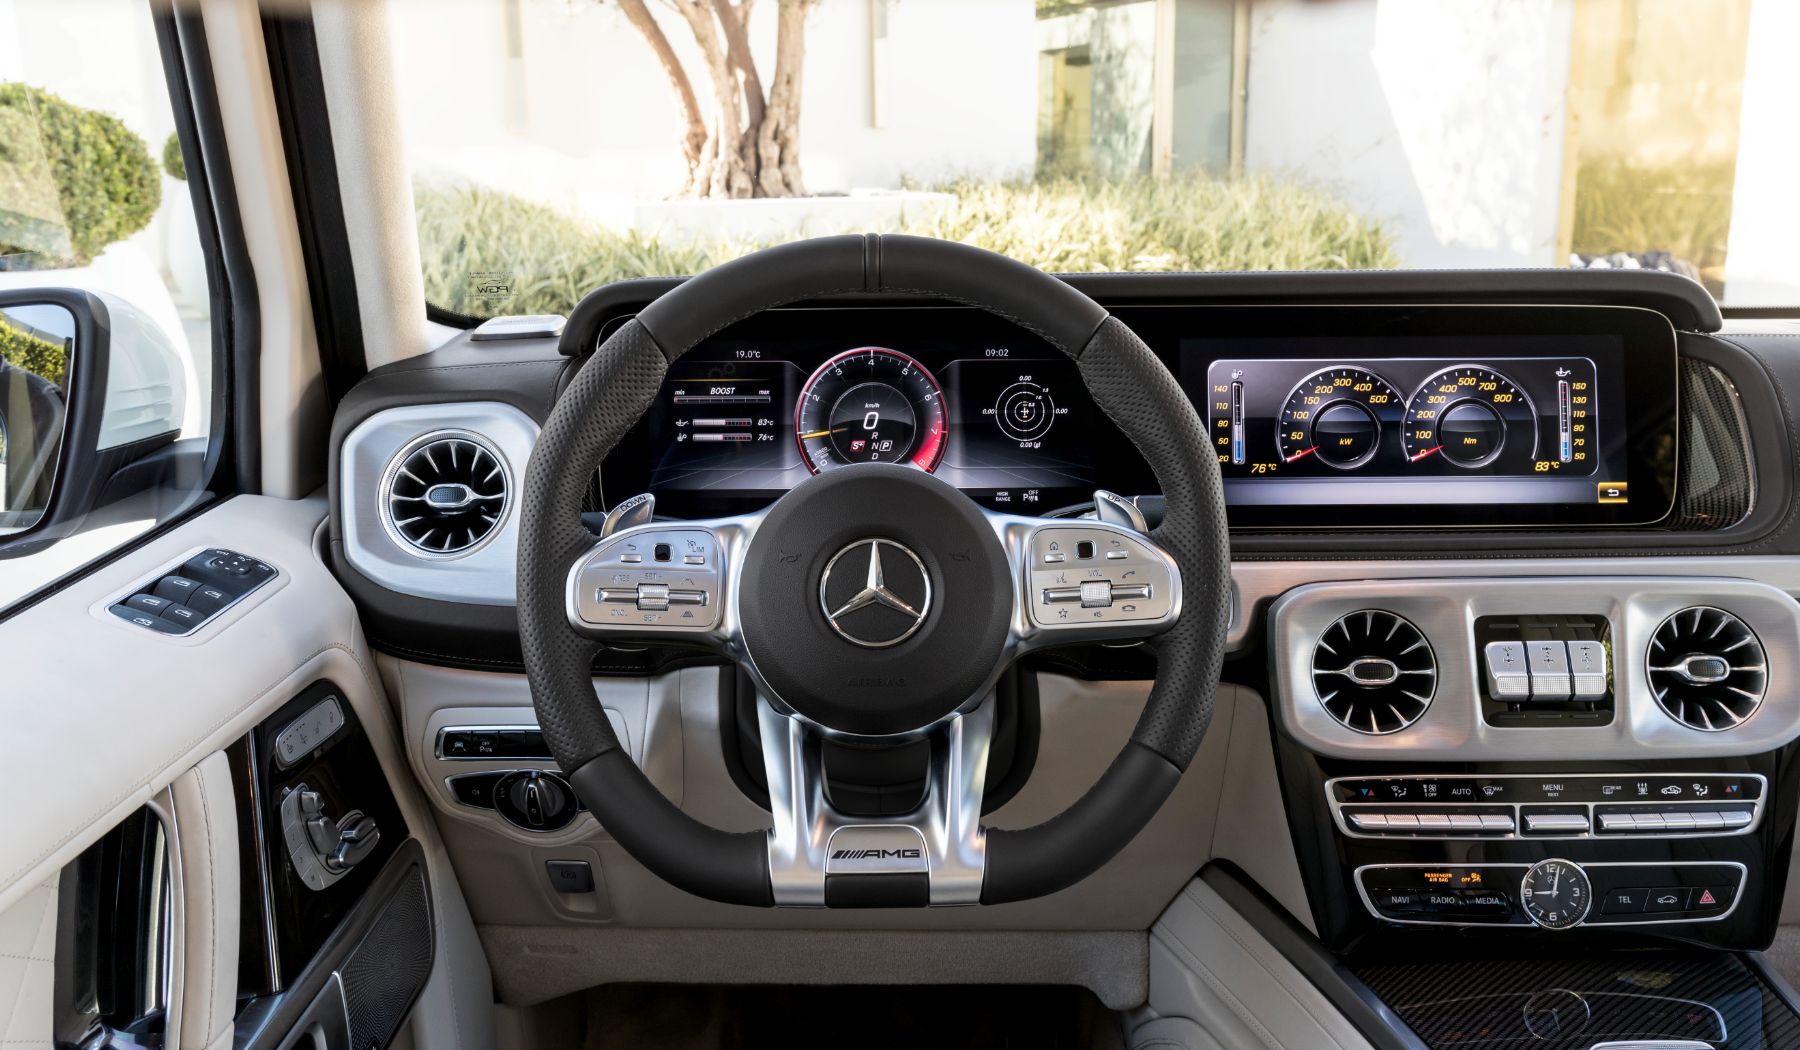 Climb Inside the Outrageous MercedesAMG G 63 to Discover Its Amazing